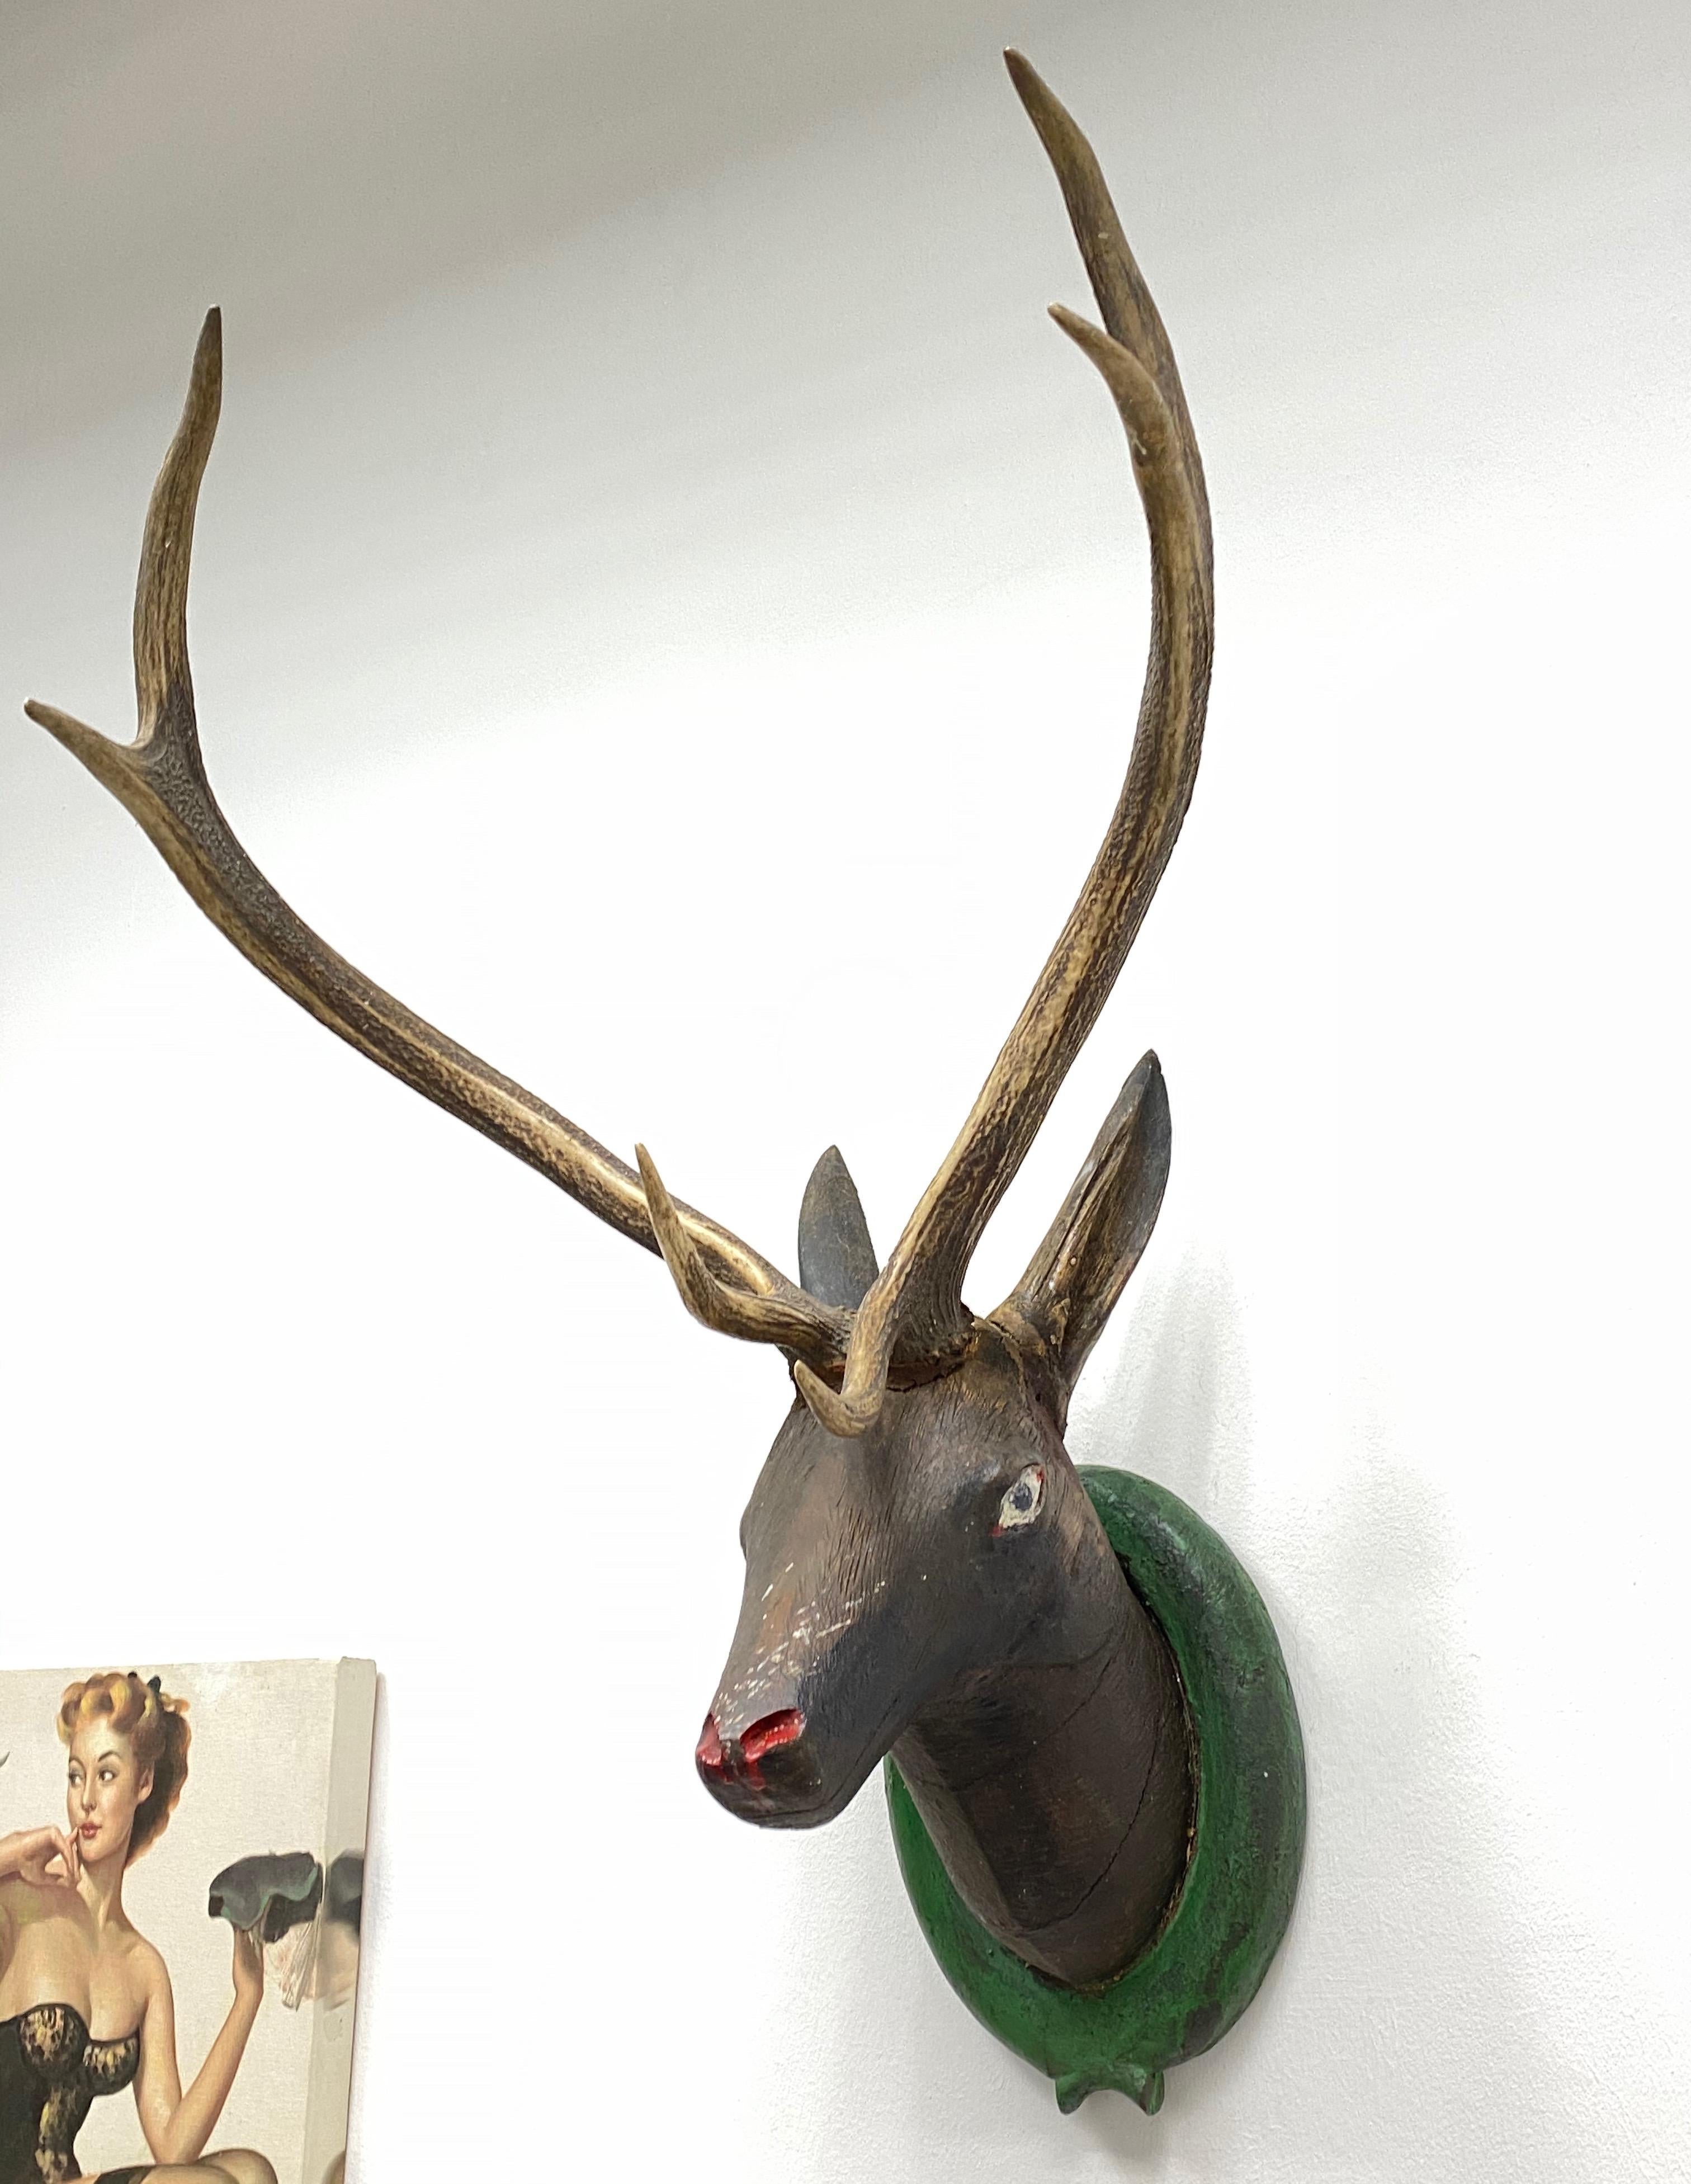 A great looking hand carved original wooden Folk Art deer head wall decoration. A great piece for a suitable ambiance in a trophy room or the office of a Hunter or Woodsman. More than likely one of the Folk Art items made between 1860 and the late